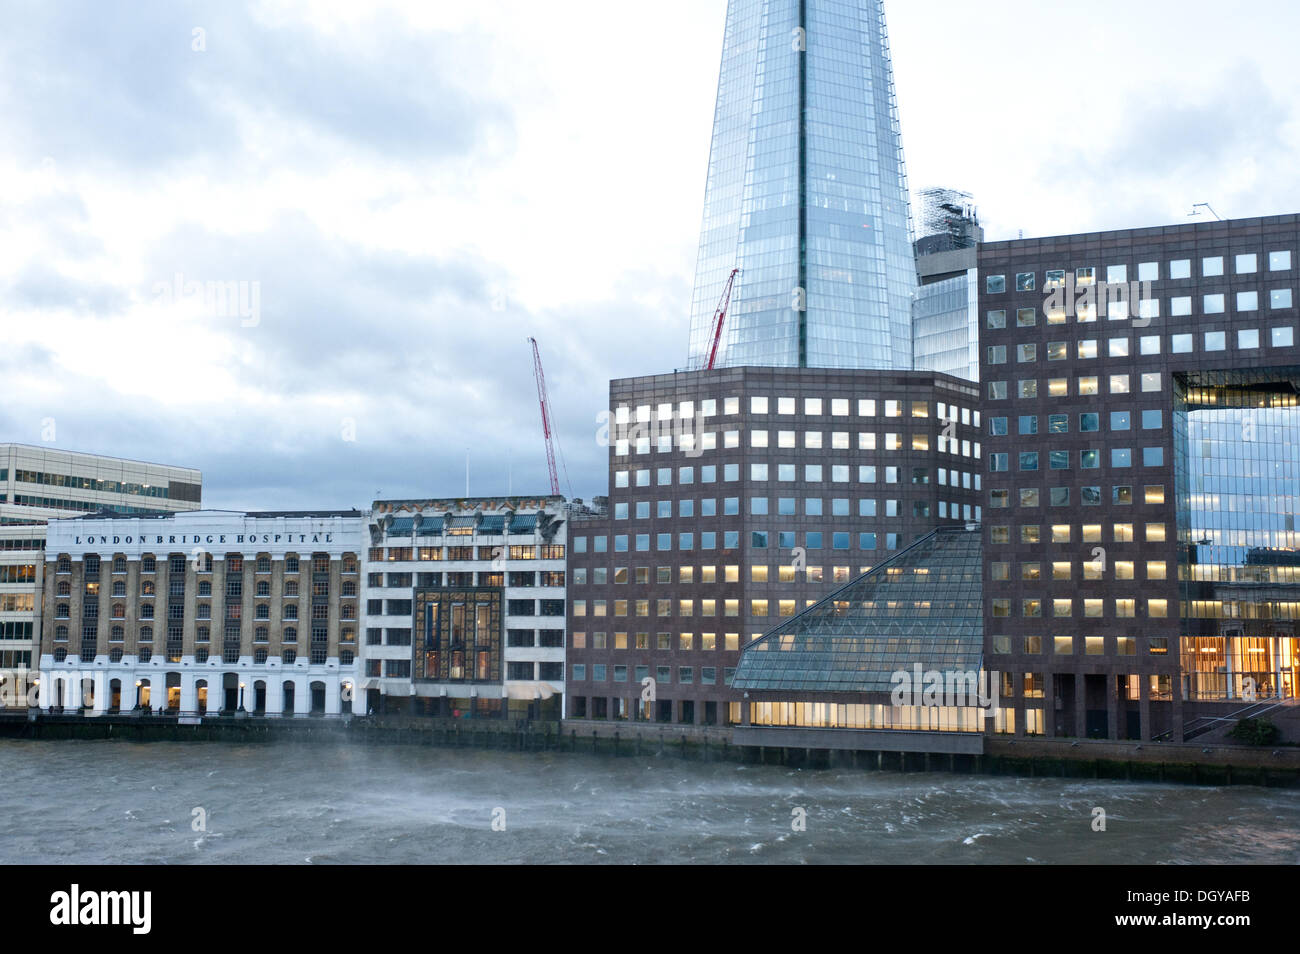 London, UK - 28 October 2013: heavy wind on the river Thames at London Bridge as the city is hit by the storm. The storm, called St Jude, brought the windiest weather to hit the UK since 1987.  Credit:  Piero Cruciatti/Alamy Live News Stock Photo